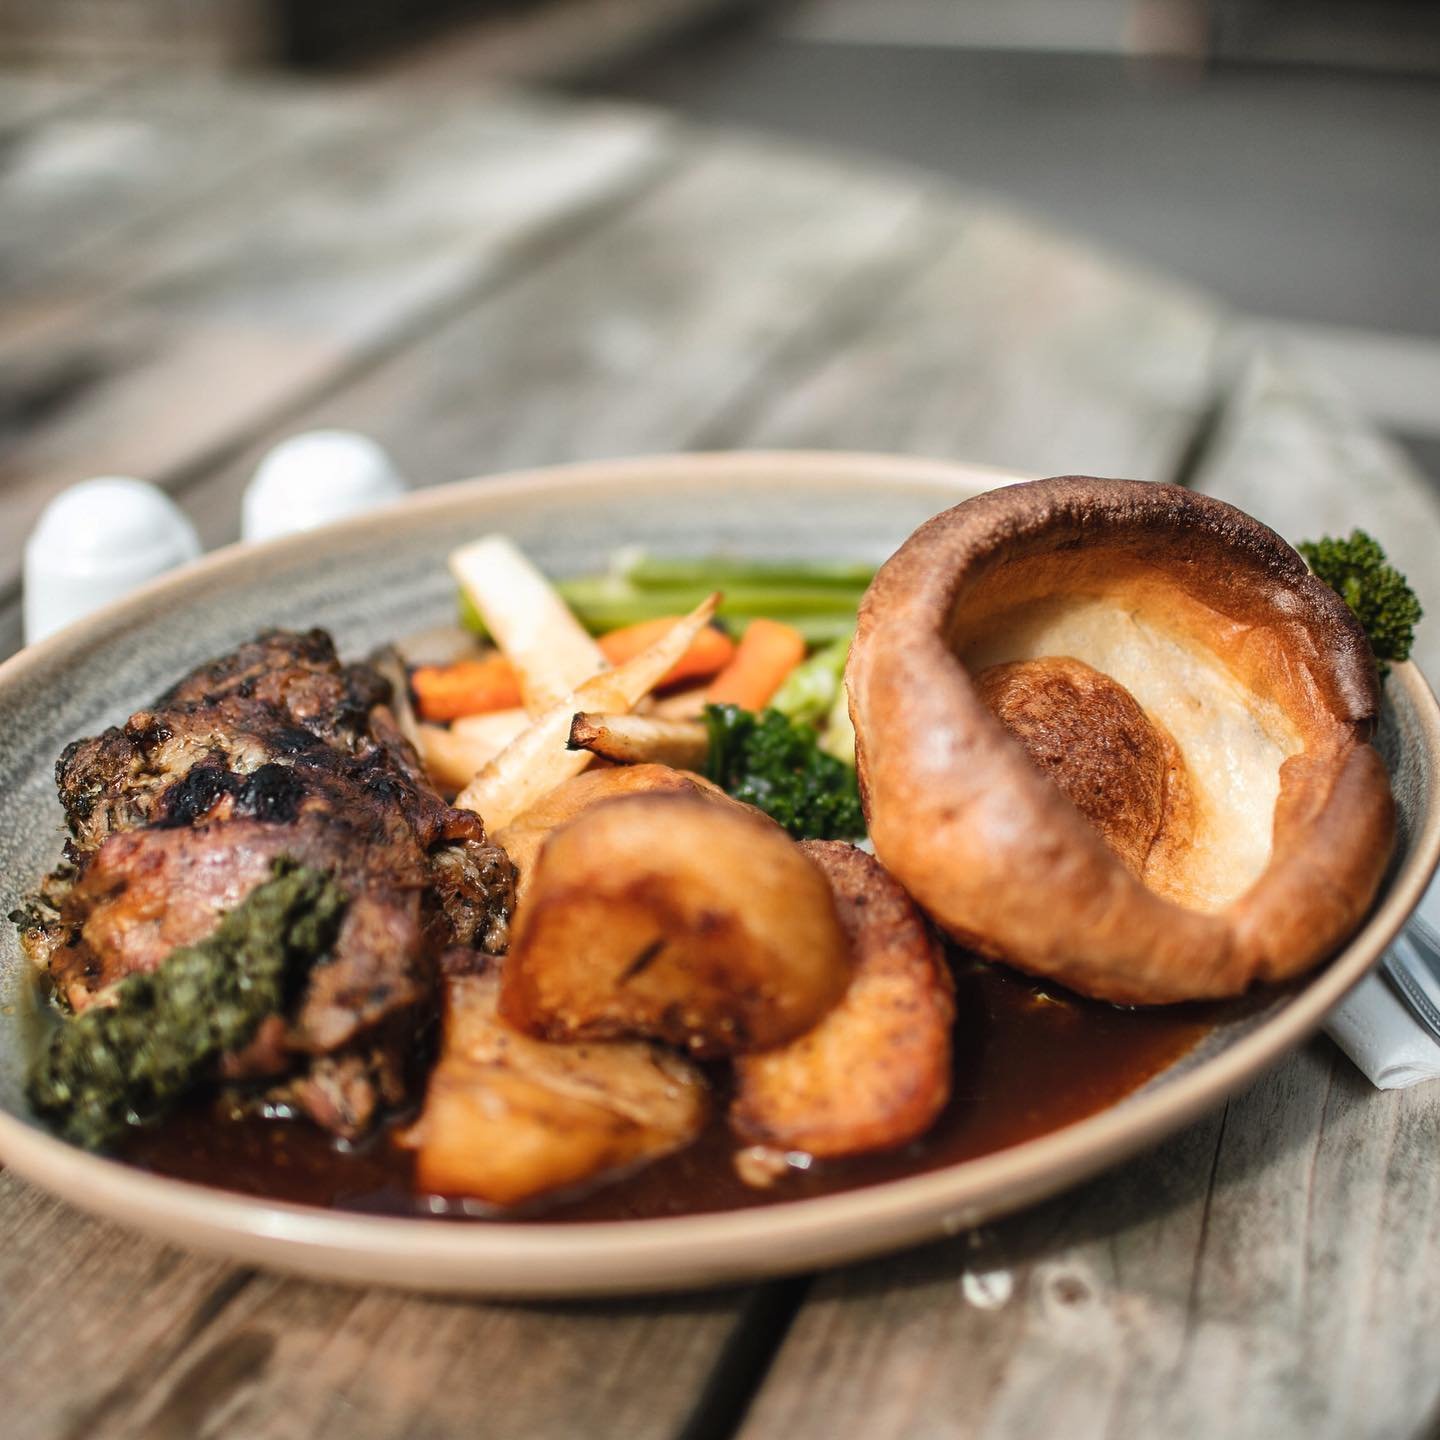 Get ready for a Bank Holiday treat this Sunday, May 5th! Don't miss out on The Royal Oak&rsquo;s epic Sunday roast. Spots are going fast for this weekend's feast, so snag your table today and spice up your Sunday. Trust us, it's the roast everyone wi